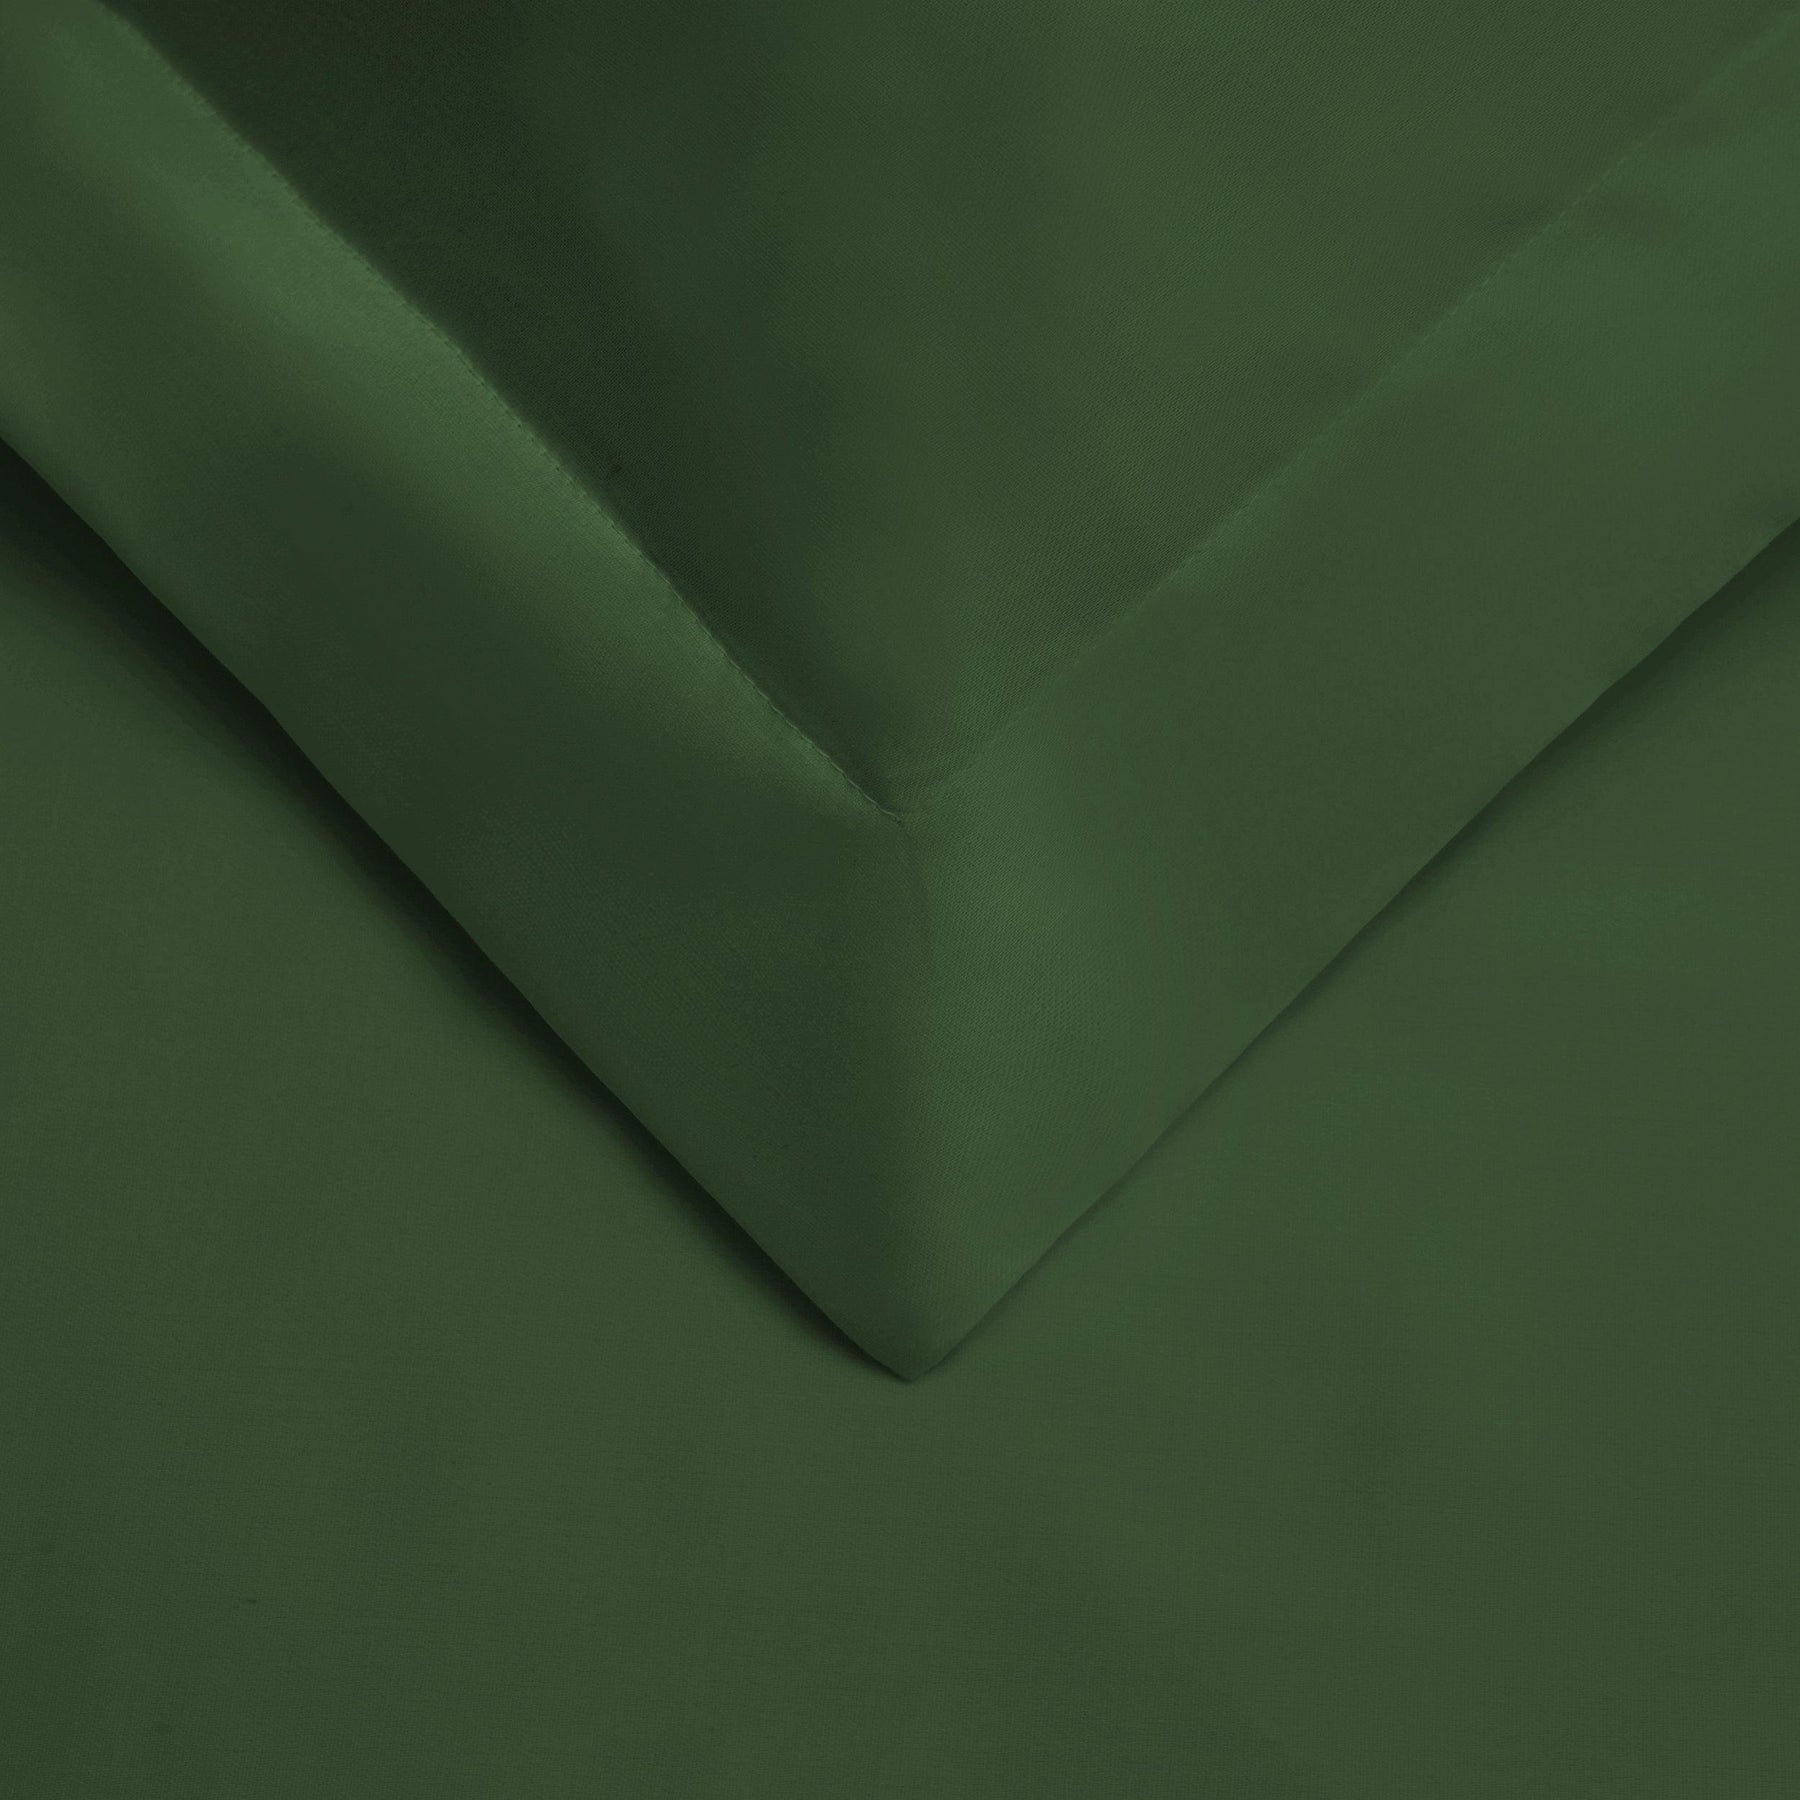  Superior Egyptian Cotton 400 Thread Count Solid Duvet Cover Set - Hunter Green